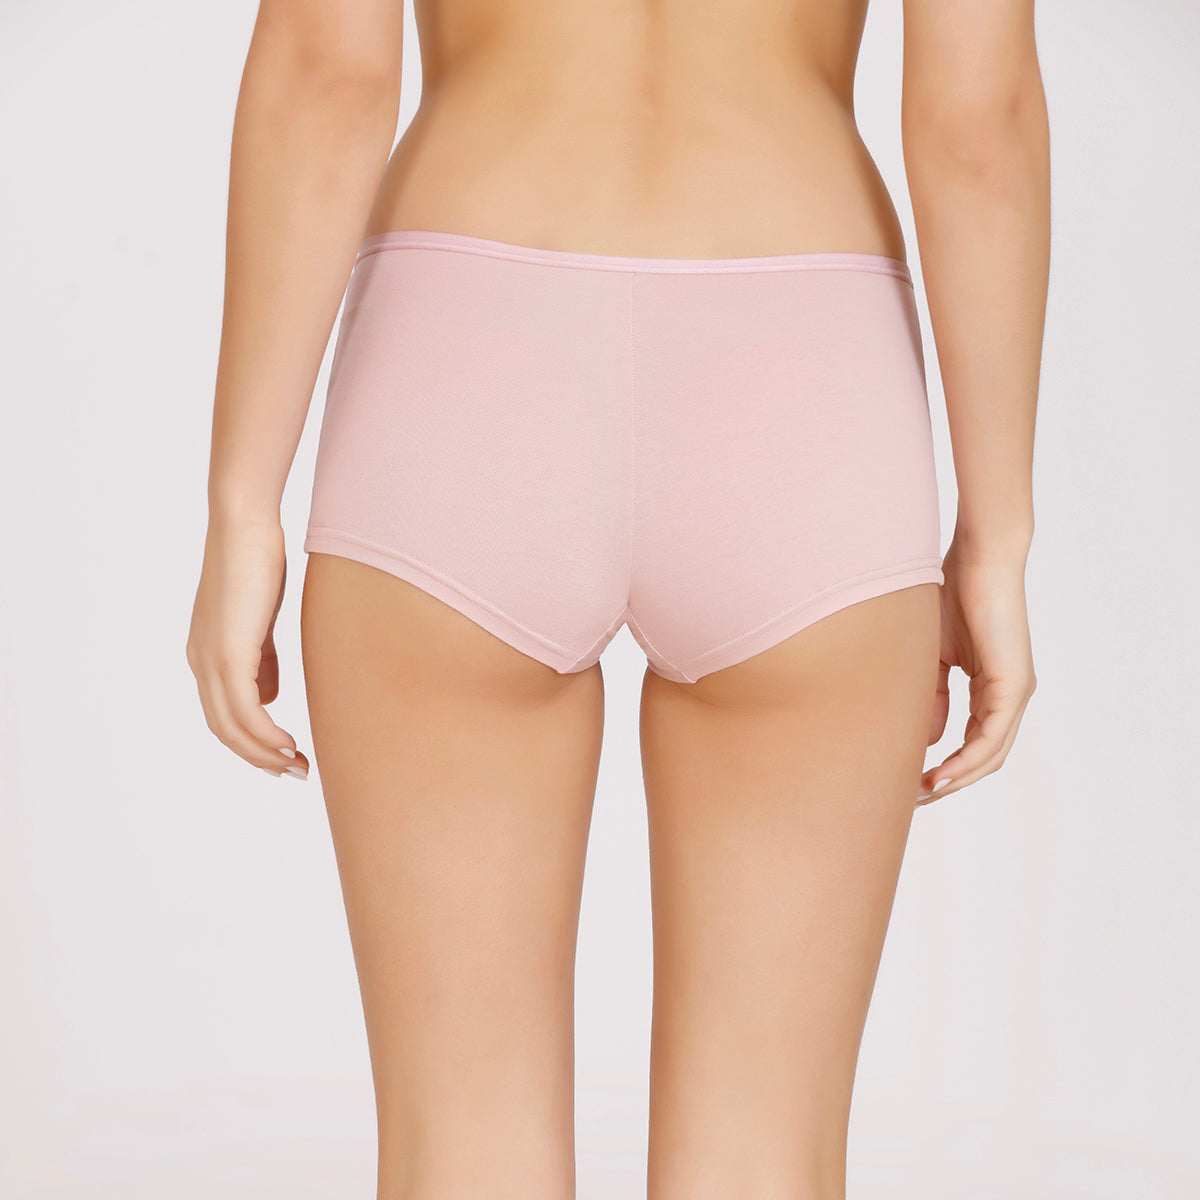 Soft stretch cotton Mid rise Boyshort with full rear coverage-NYP082-Pink